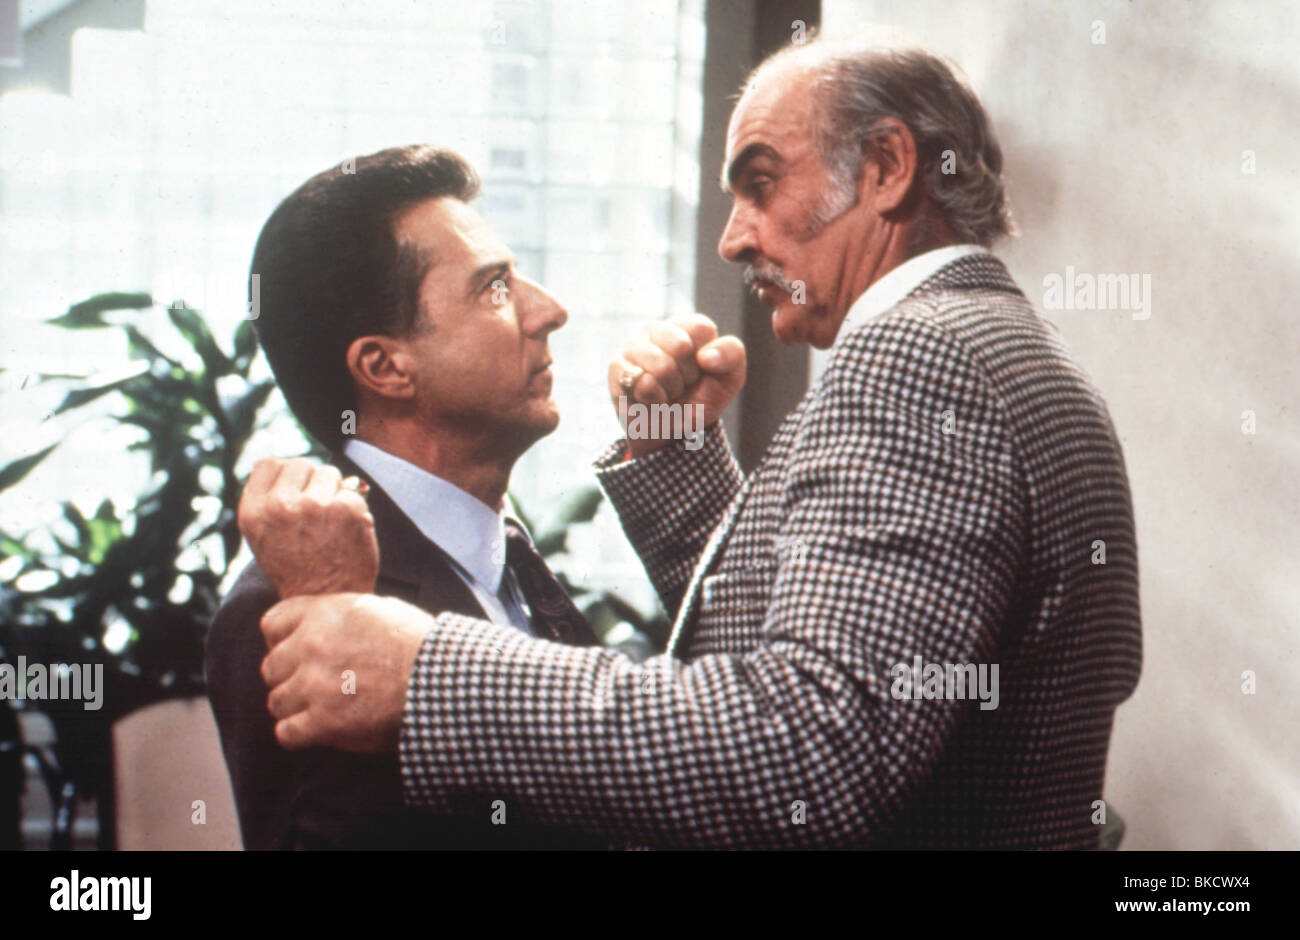 FAMILY BUSINESS (1989) DUSTIN HOFFMAN, SEAN CONNERY FBS 024 Stock Photo